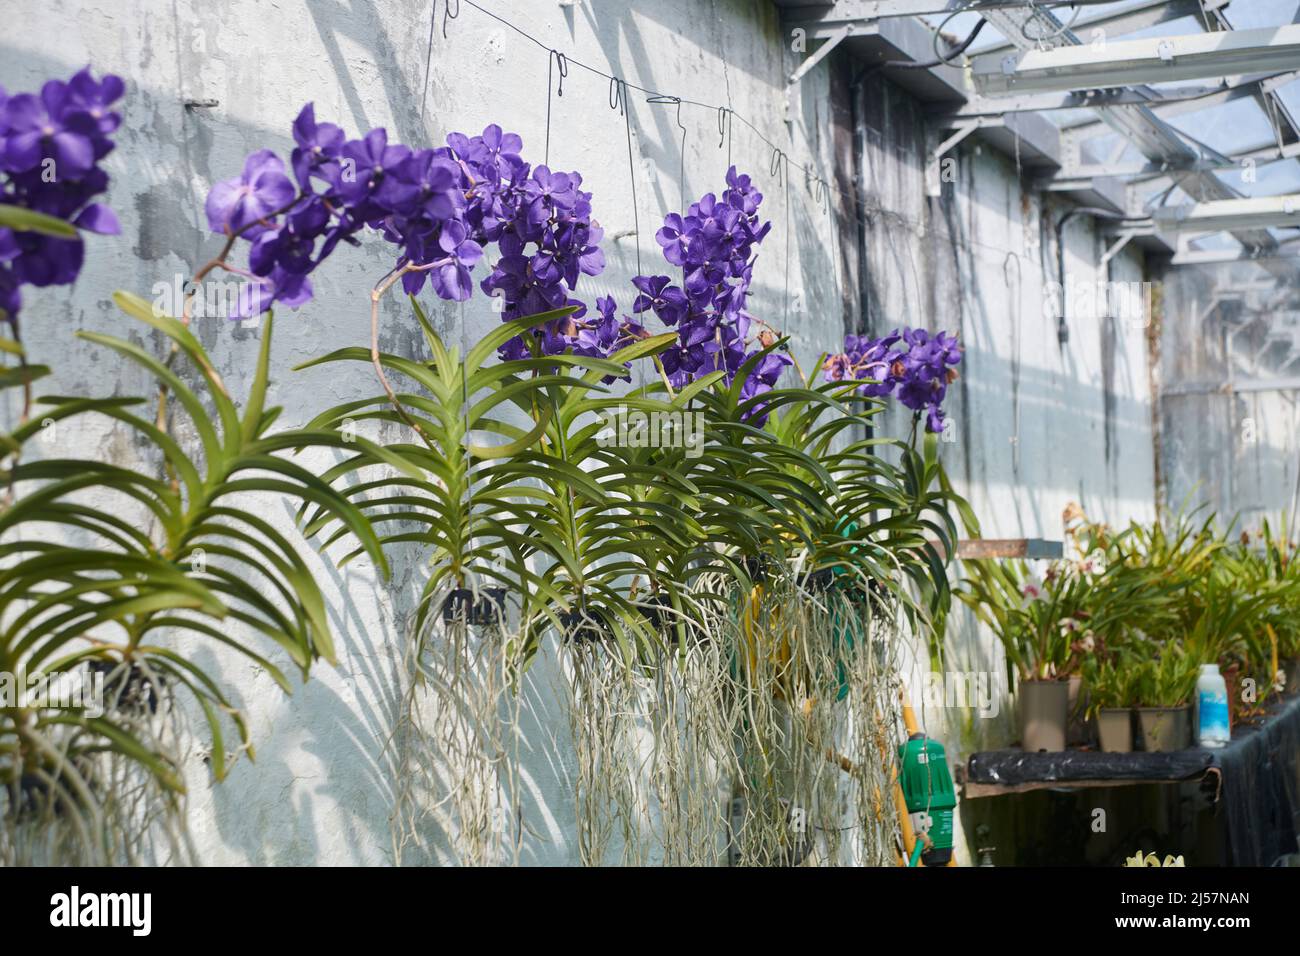 Vanda Orchids in full bloom, a true blue orchid flower. Stock Photo